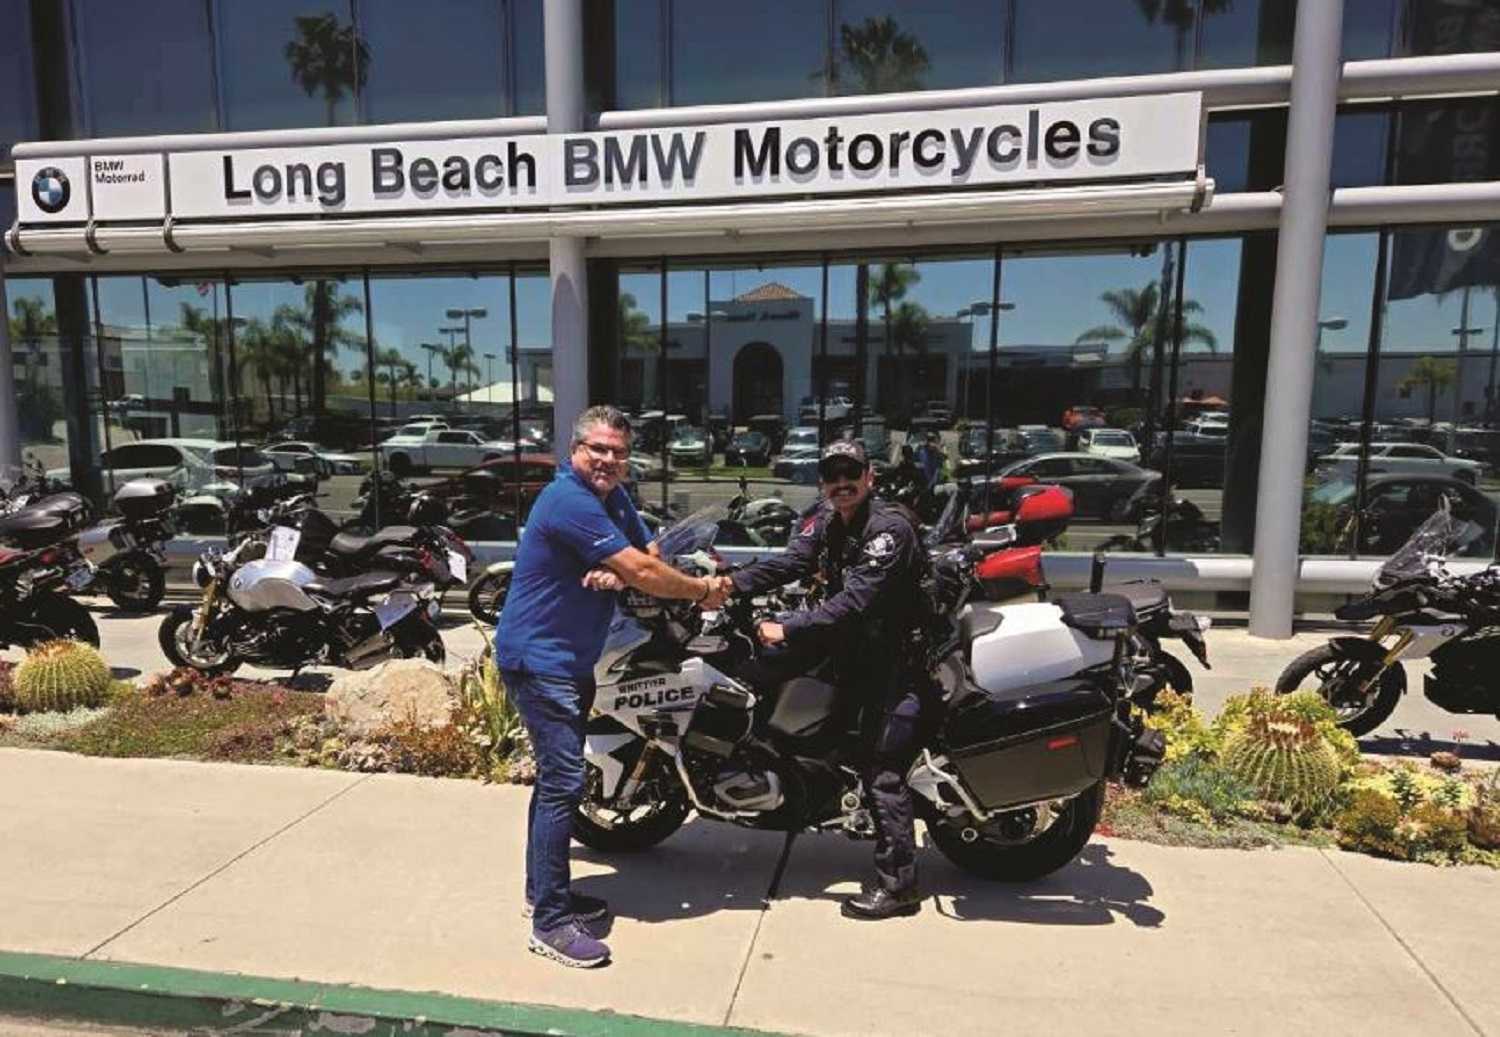 Long Beach BMW Motorcycles Delivers 2,000th Authority Motorcycle.